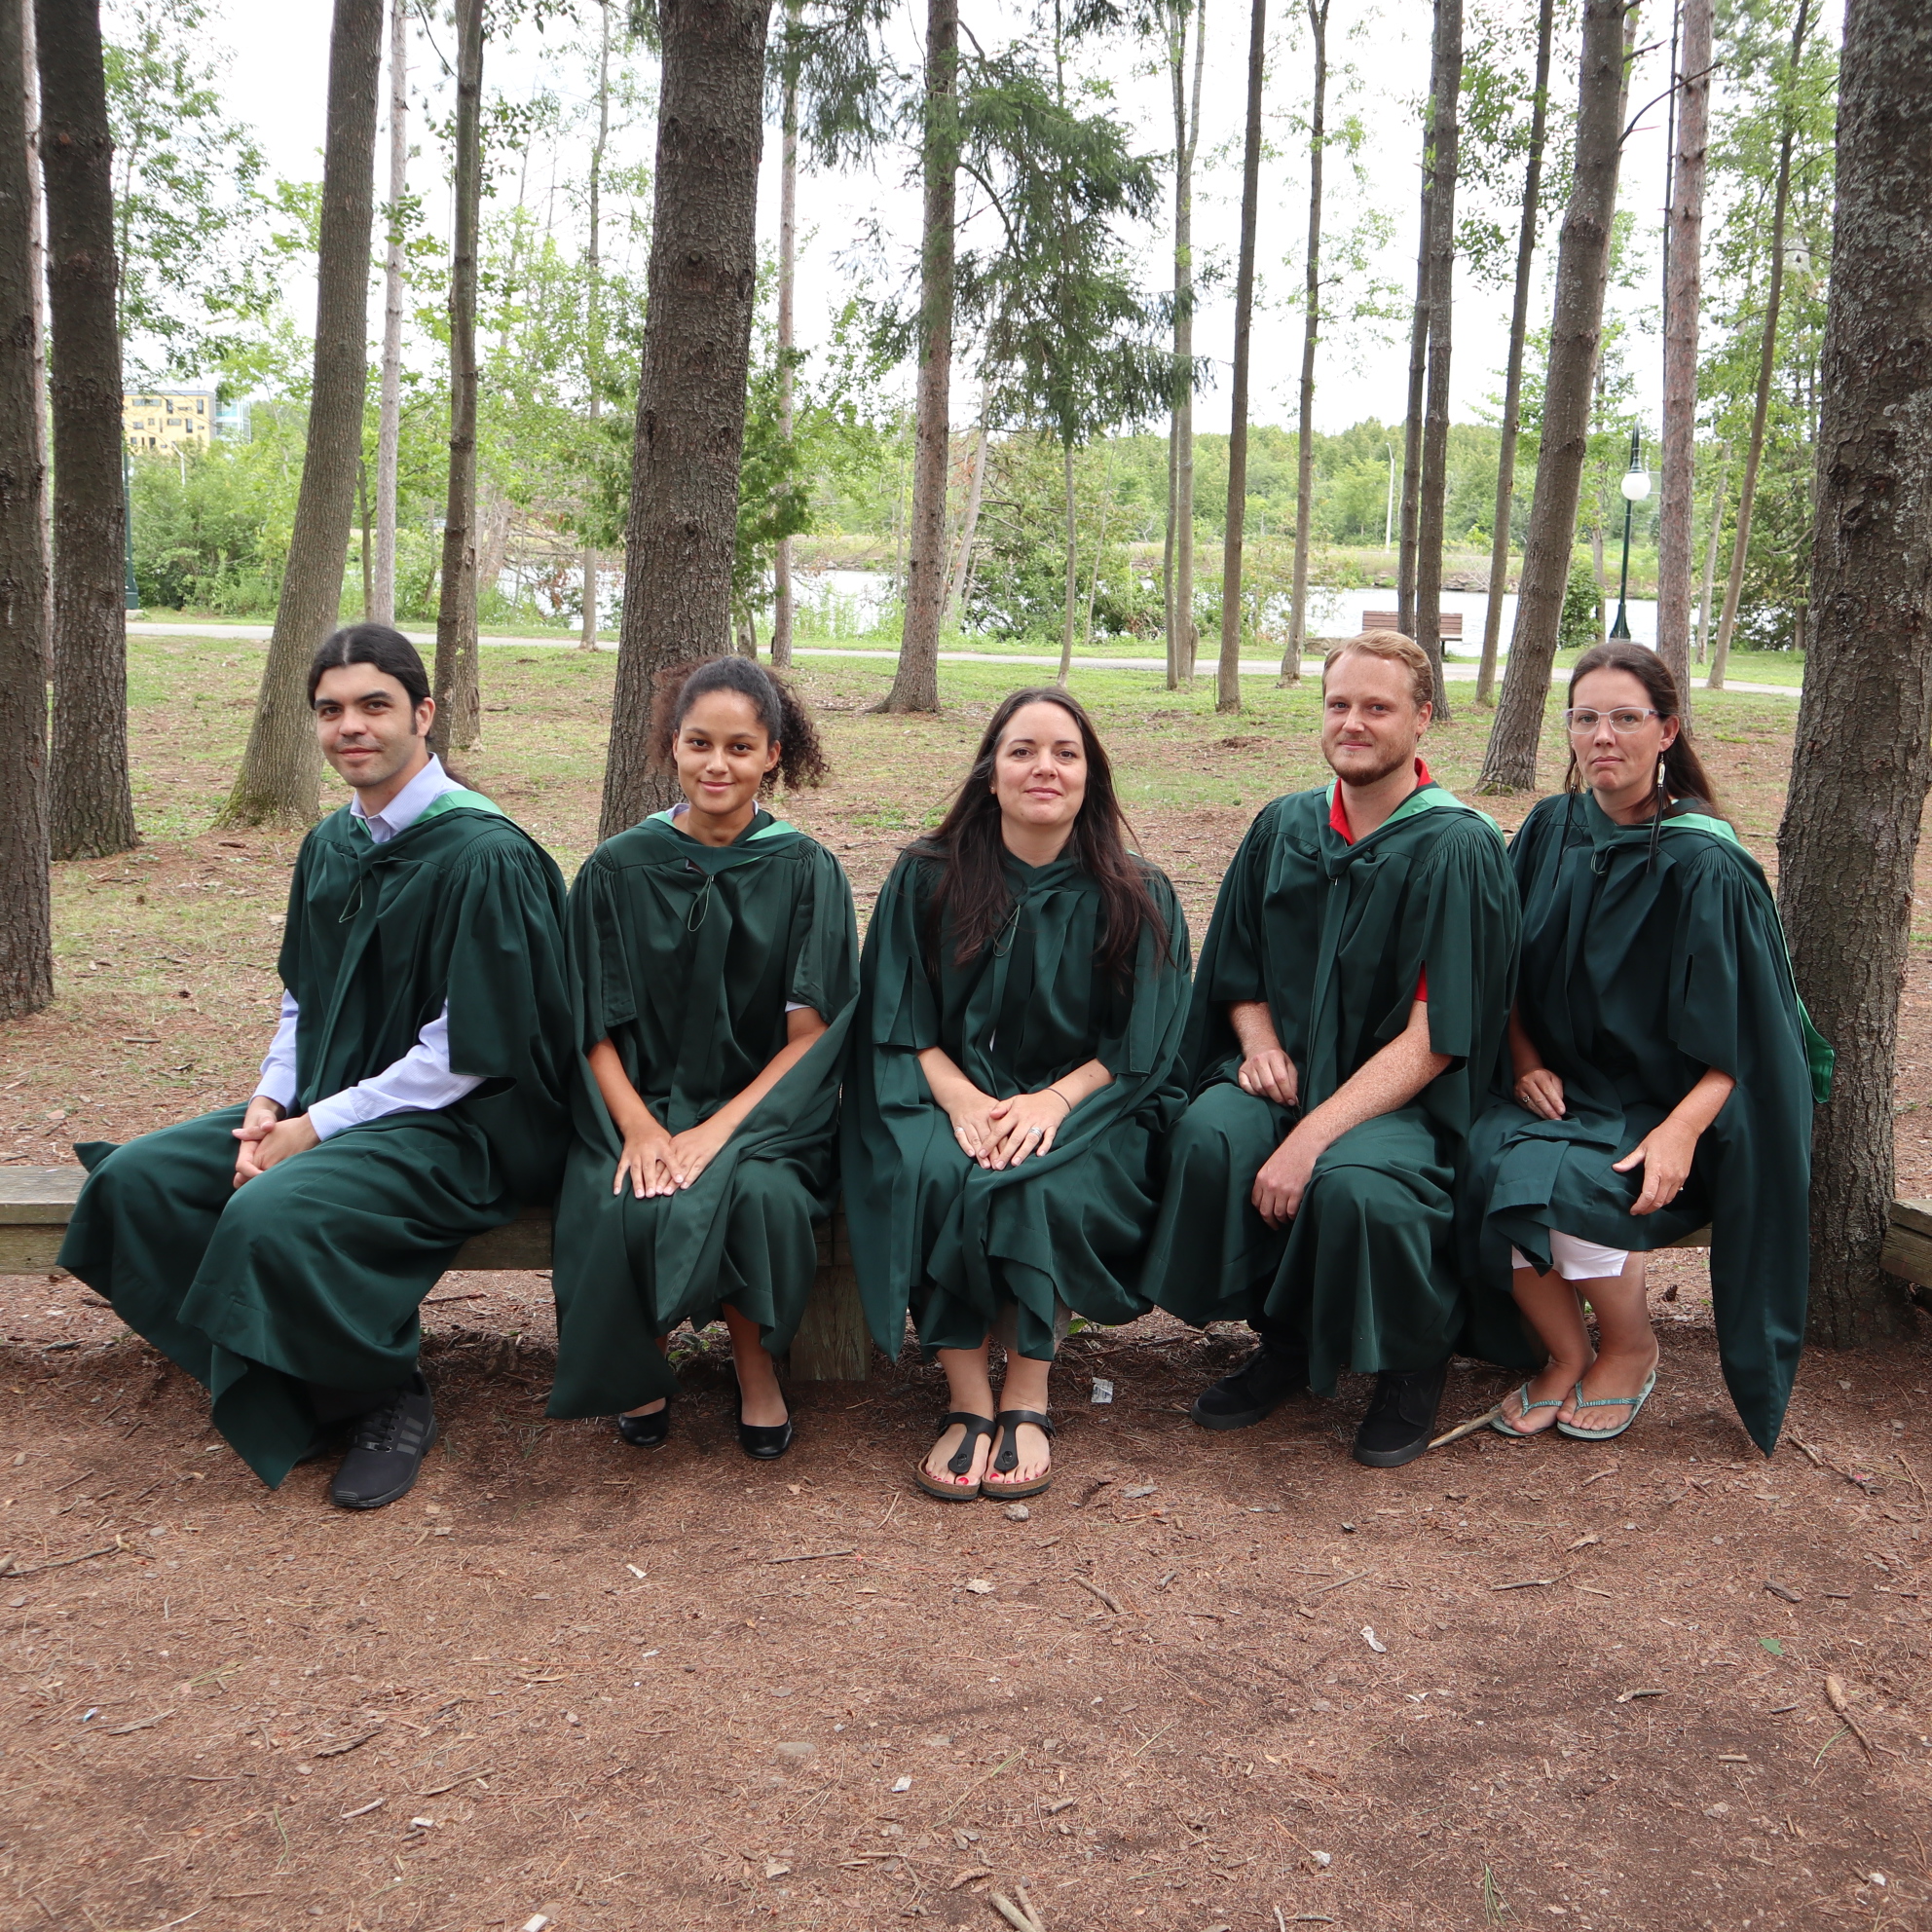 Graduates sitting on log with robes on